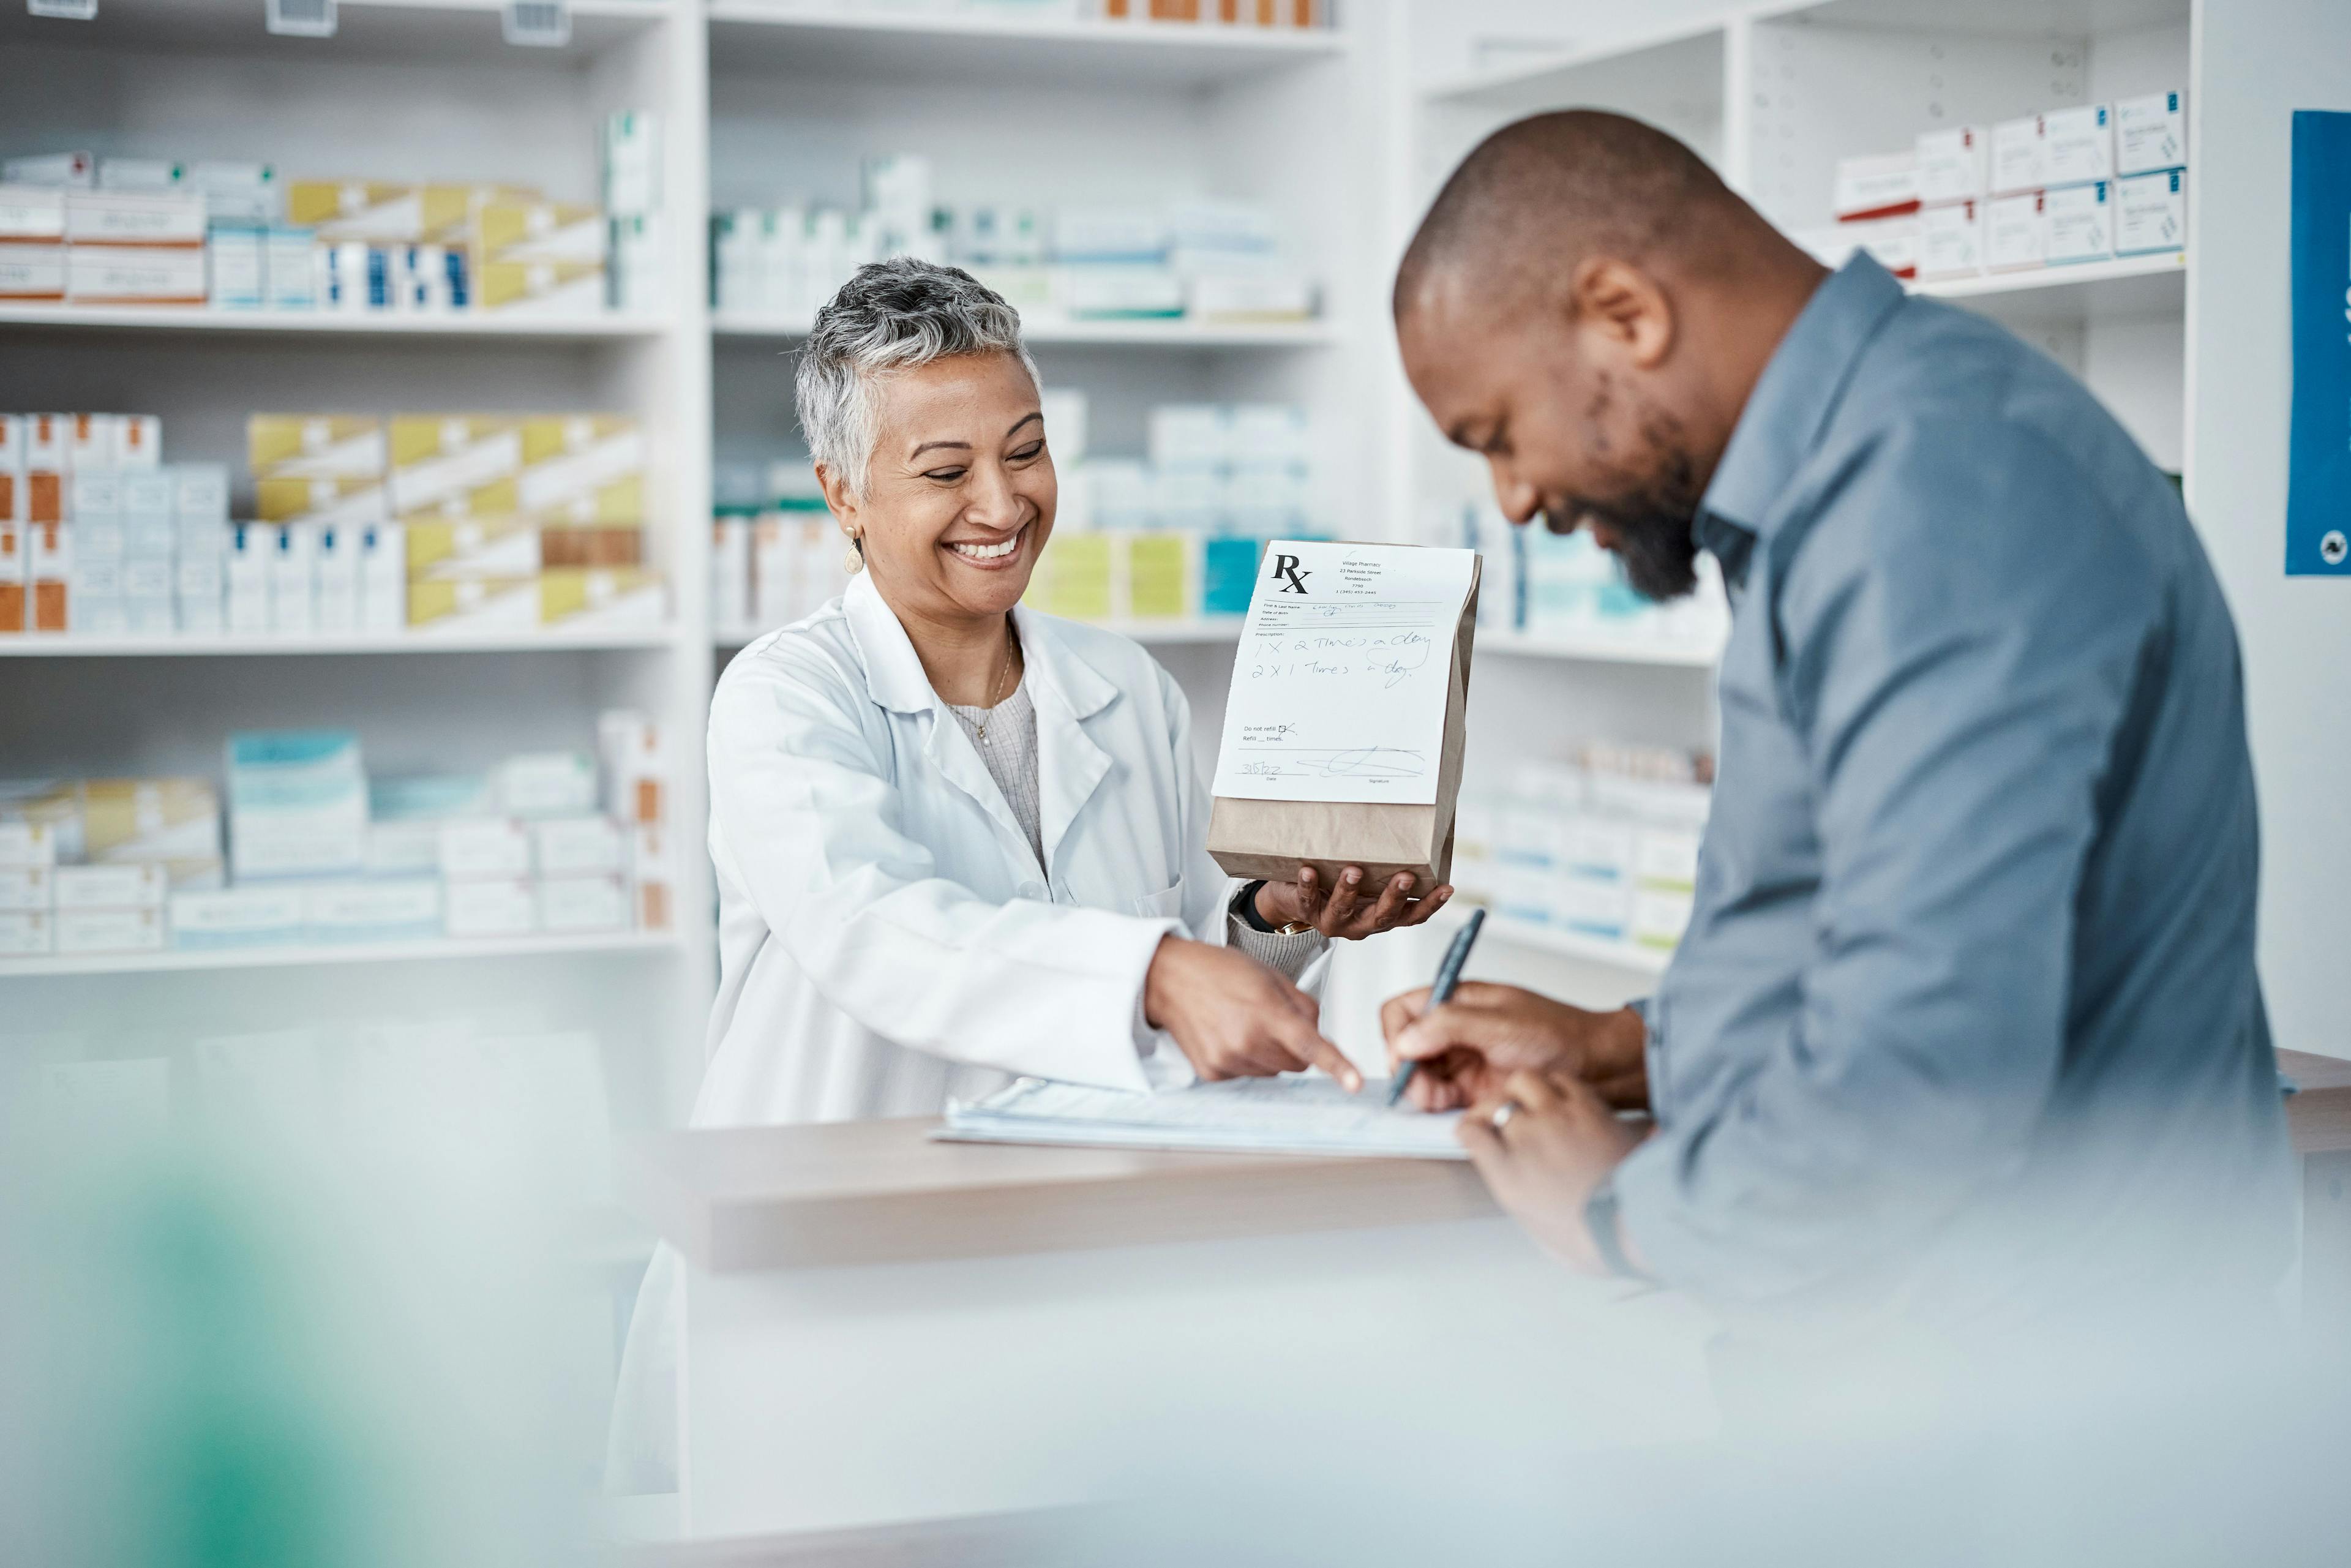 Medicine, shopping or pharmacist with customer writing personal or medical information in pharmacy | Image Credit: C Daniels/peopleimages.com